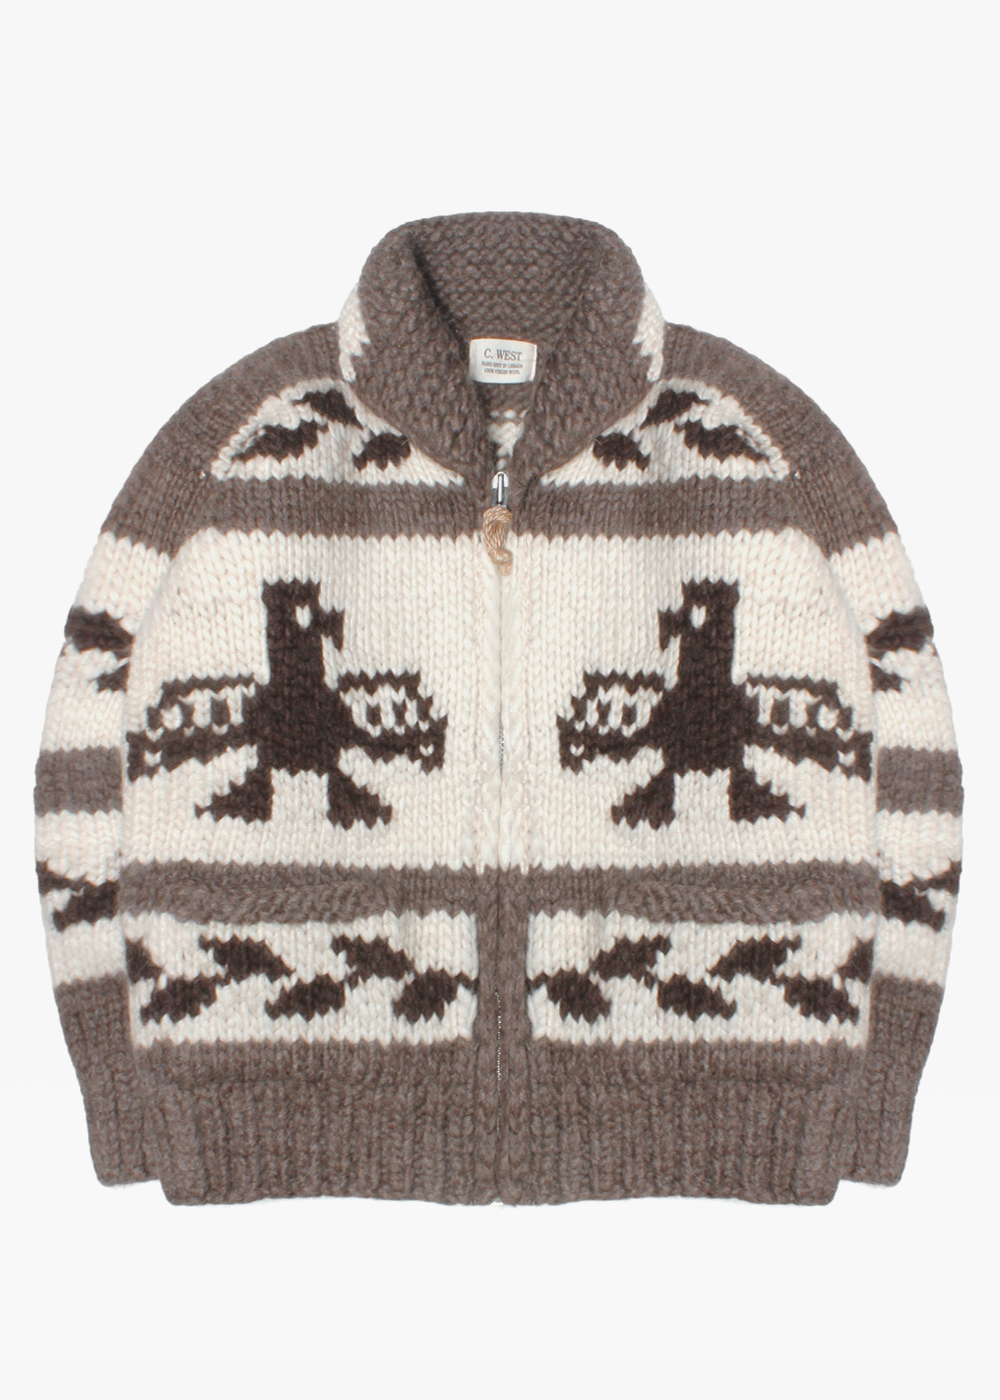 C.WEST’over fit’cable heavy wool knit cowichan